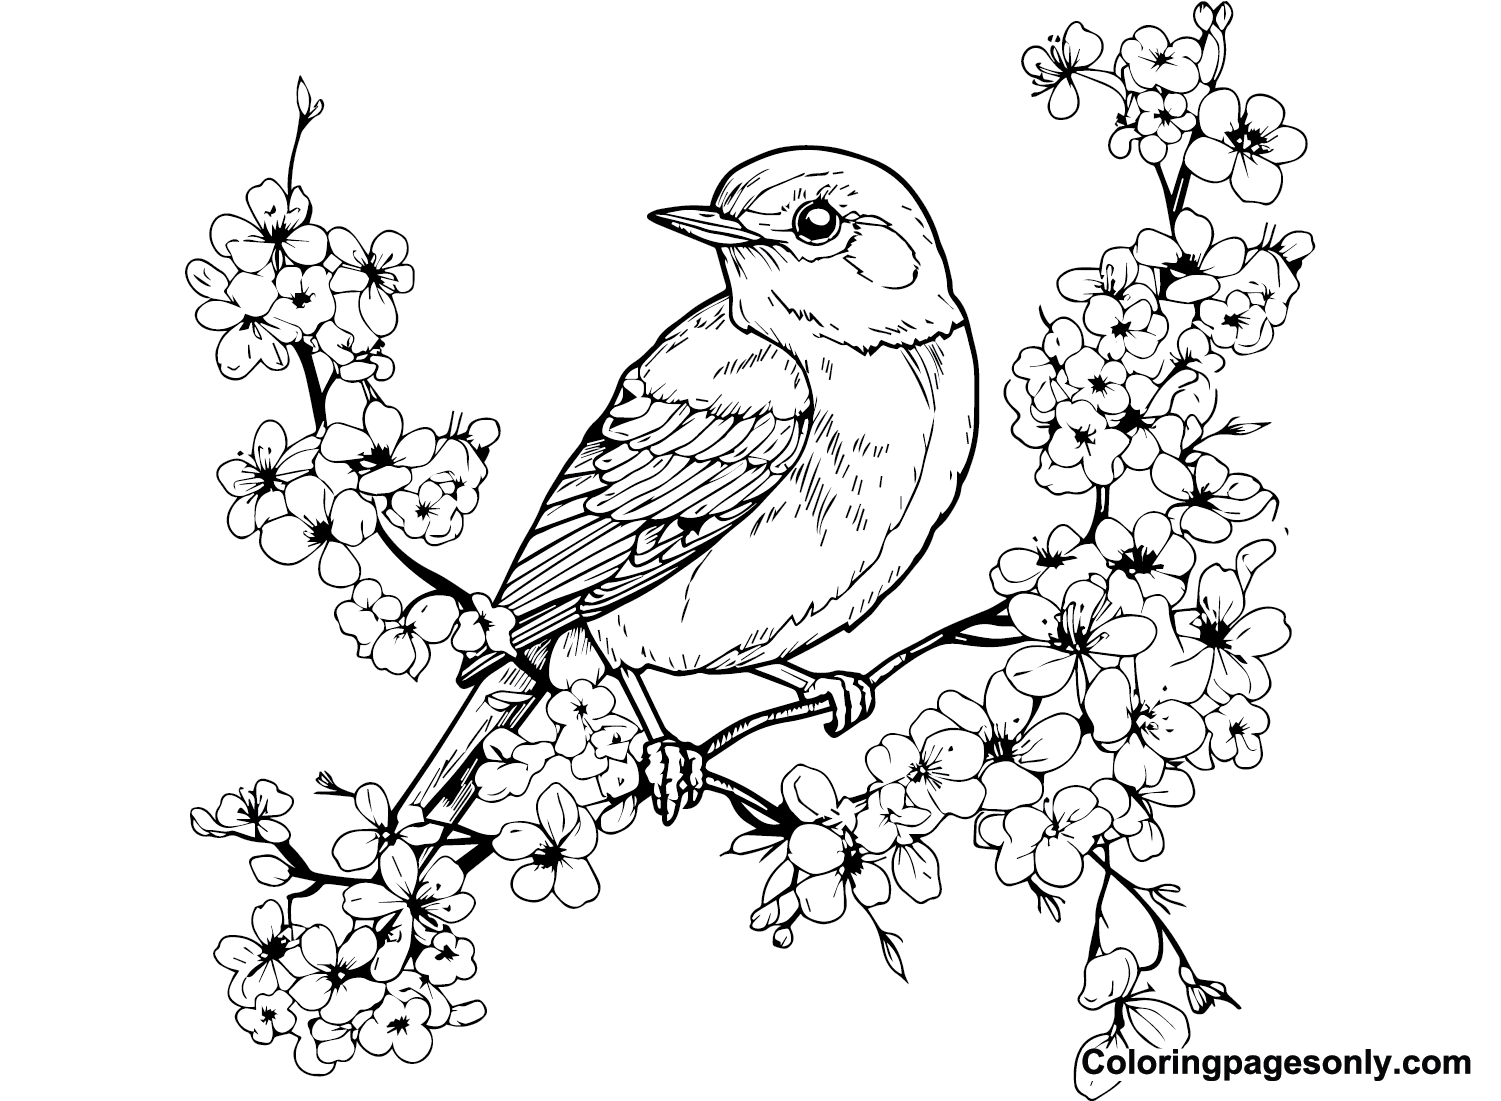 Bird and Cherry Blossom Coloring Page